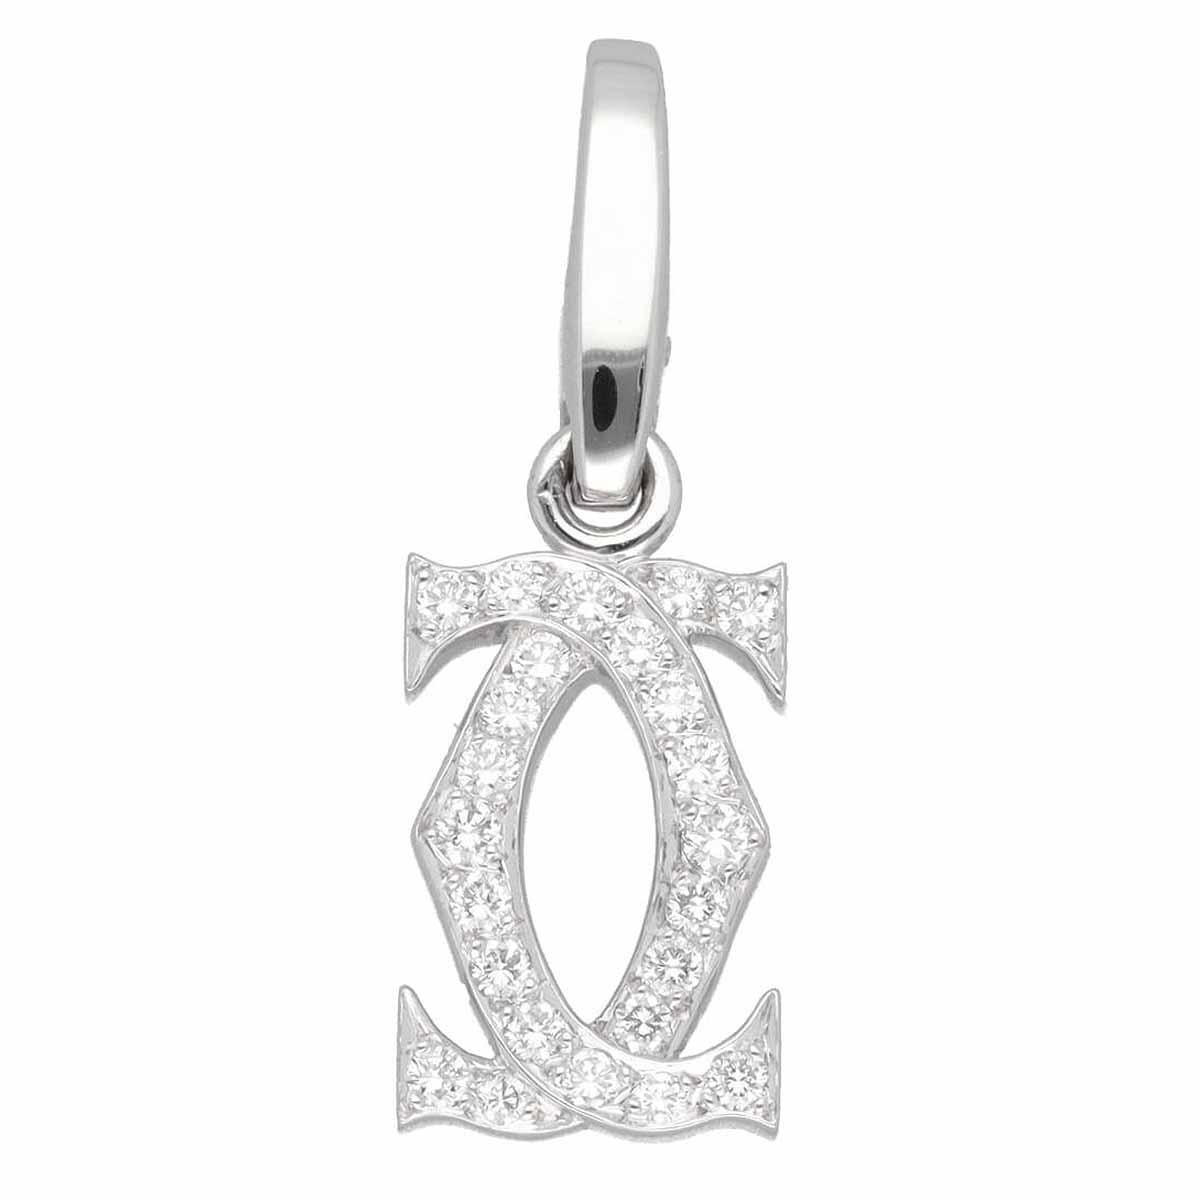 ■Item Number: 23290501
■Brand: Cartier
■Product Name: Double 2C Charm
■Material: Diamond, 750 K18 White Gold
■Weight: Approximately 2.3g (Approx)
■Size: Approximately W8.45mm x H25.47mm x D2.08mm
■Accessories: Cartier box, case, Cartier certificate